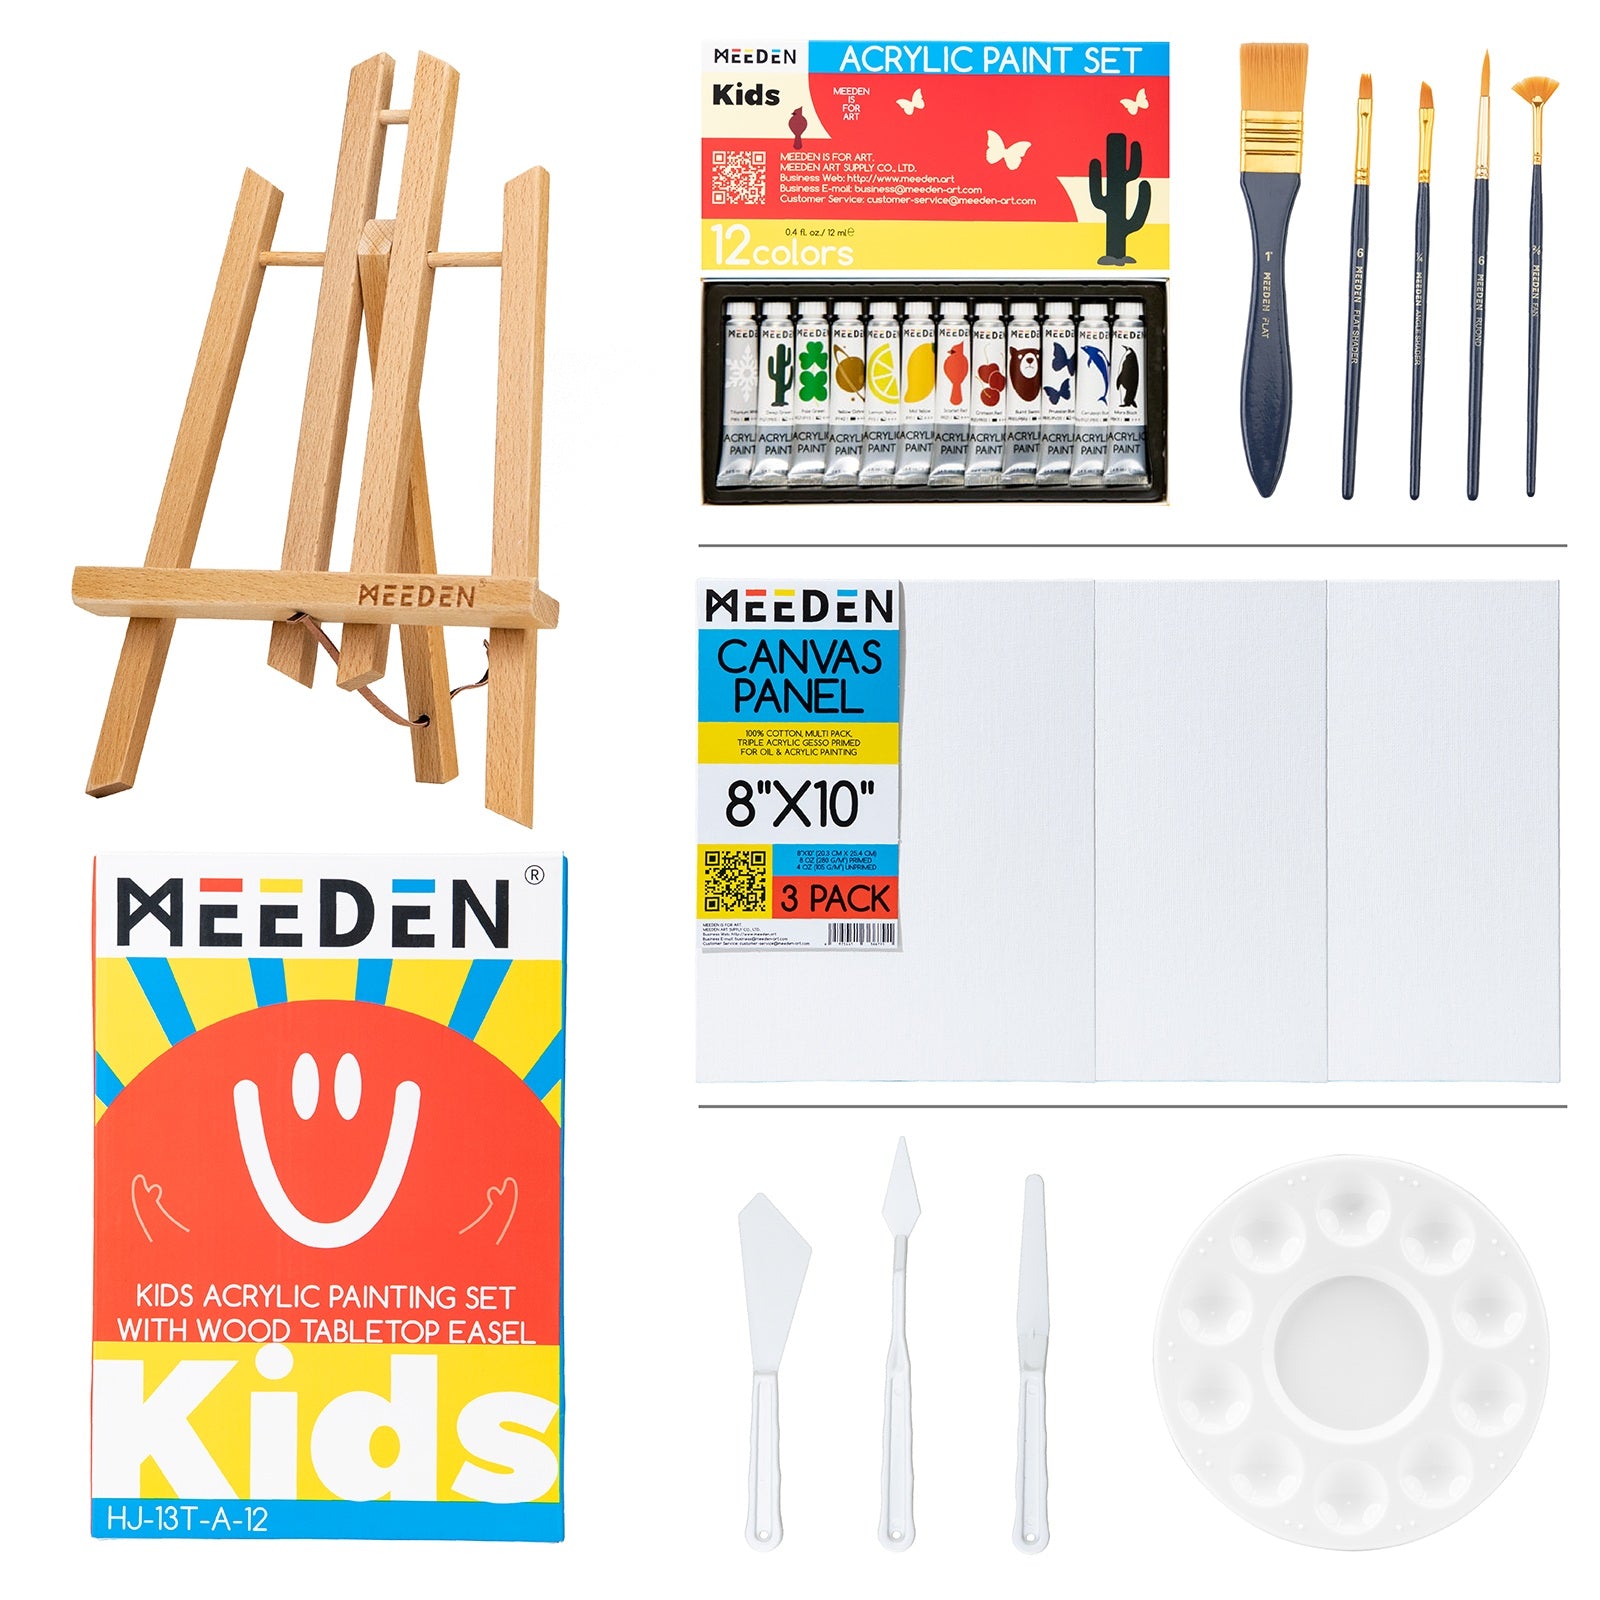 MEEDEN Kids Acrylic Painting Kit with Wood Table Easel